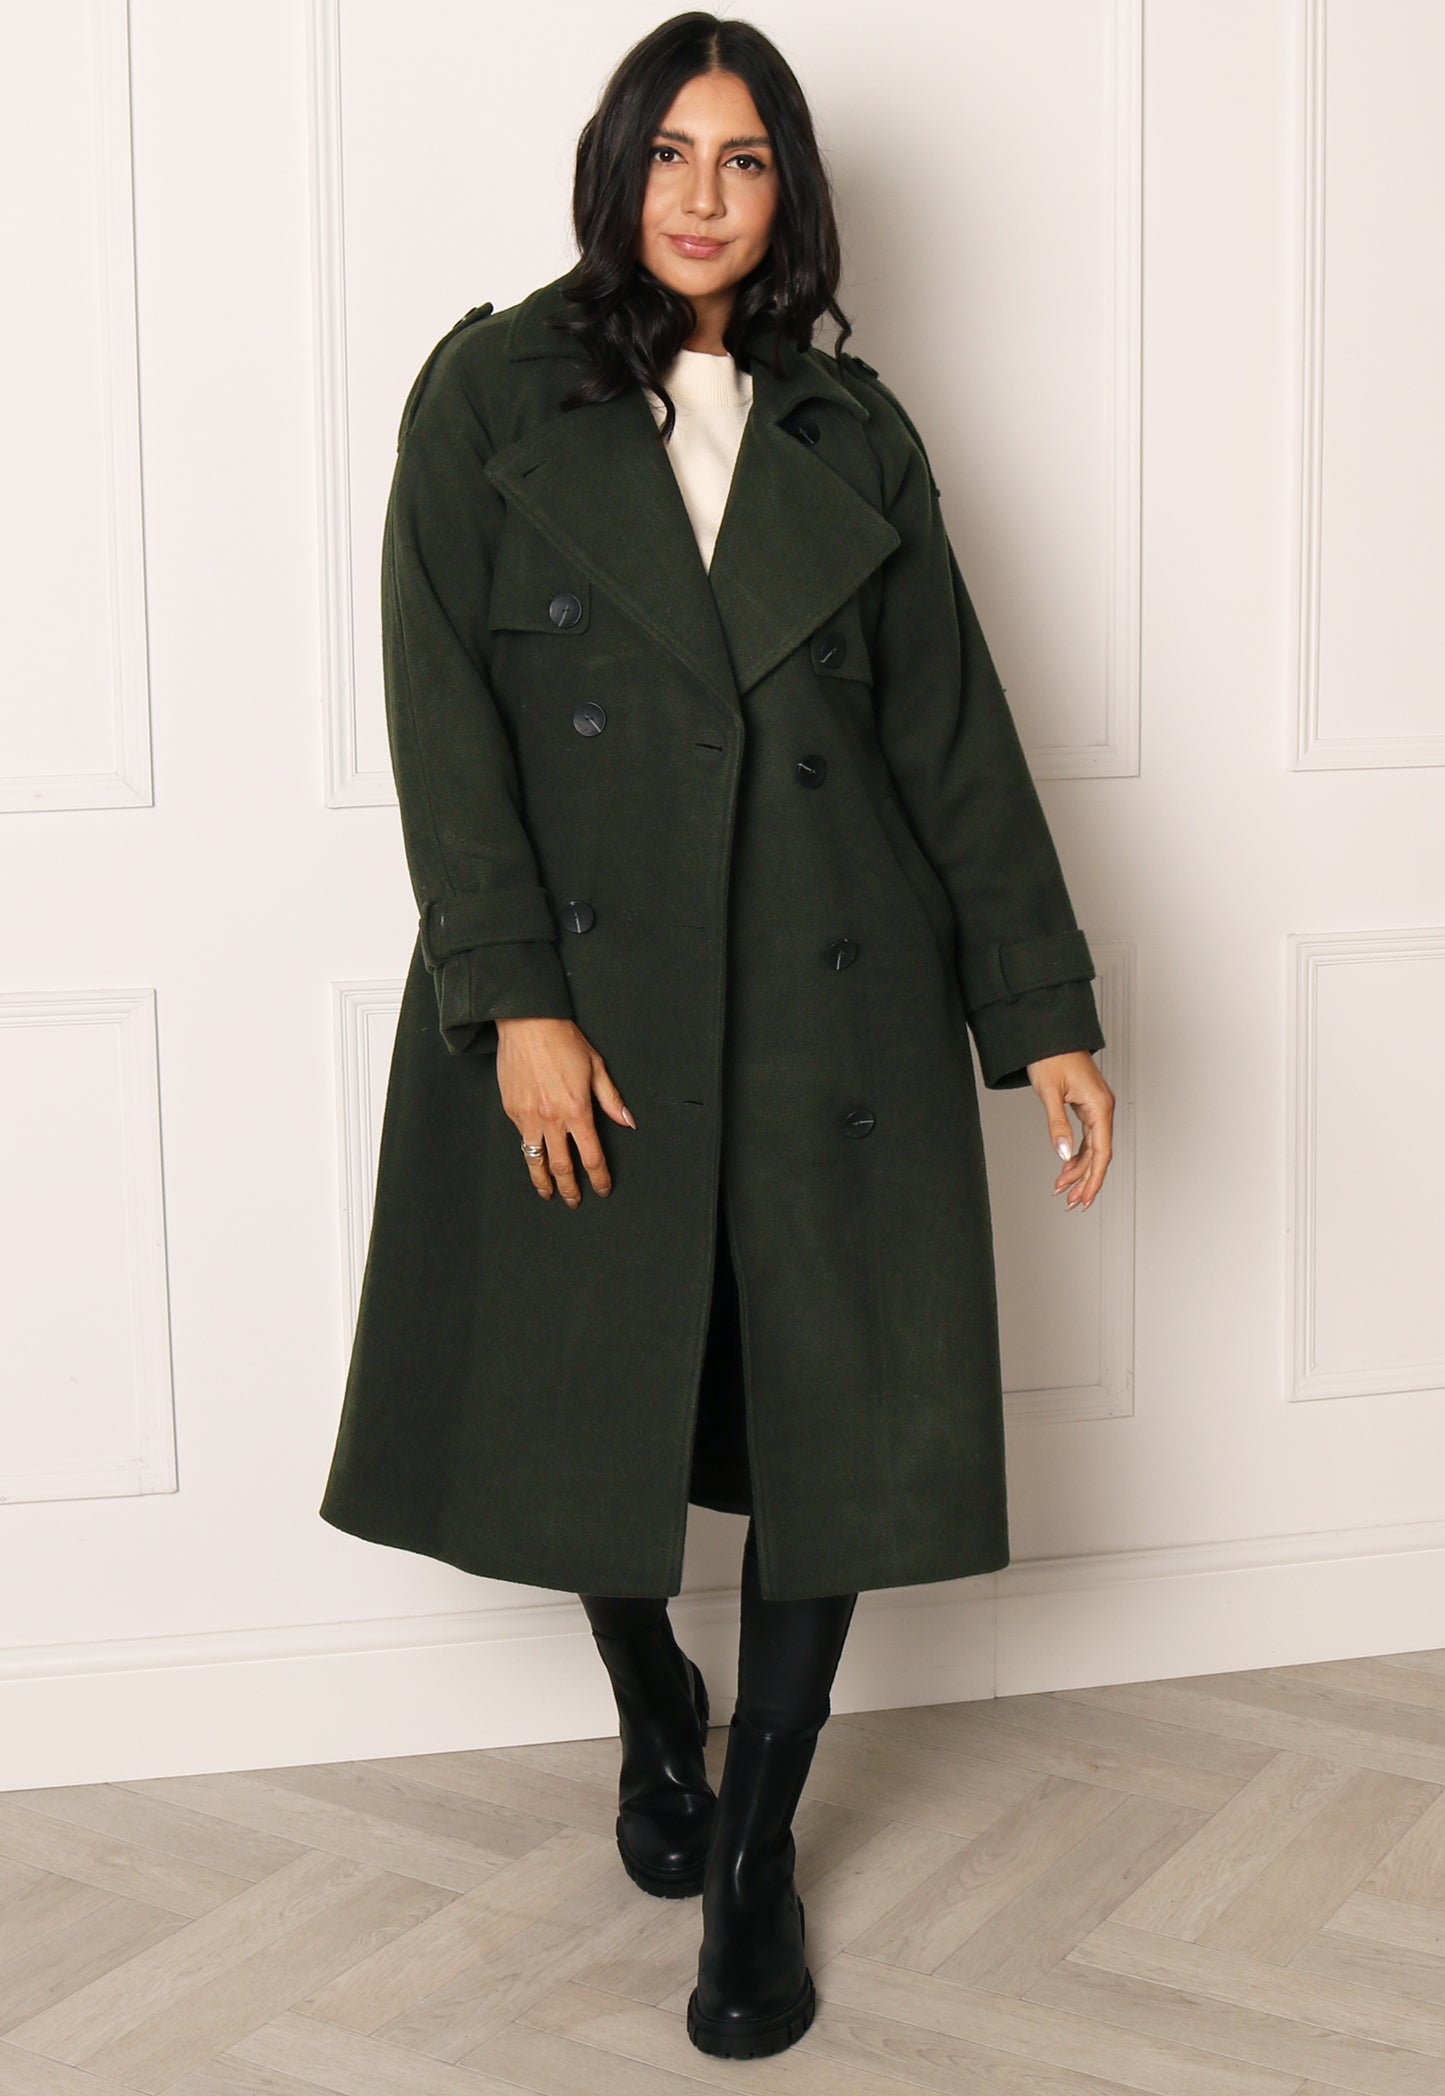 ONLY Alvina Smart Double Breasted Longline Wool Trench Coat in Dark Khaki - One Nation Clothing